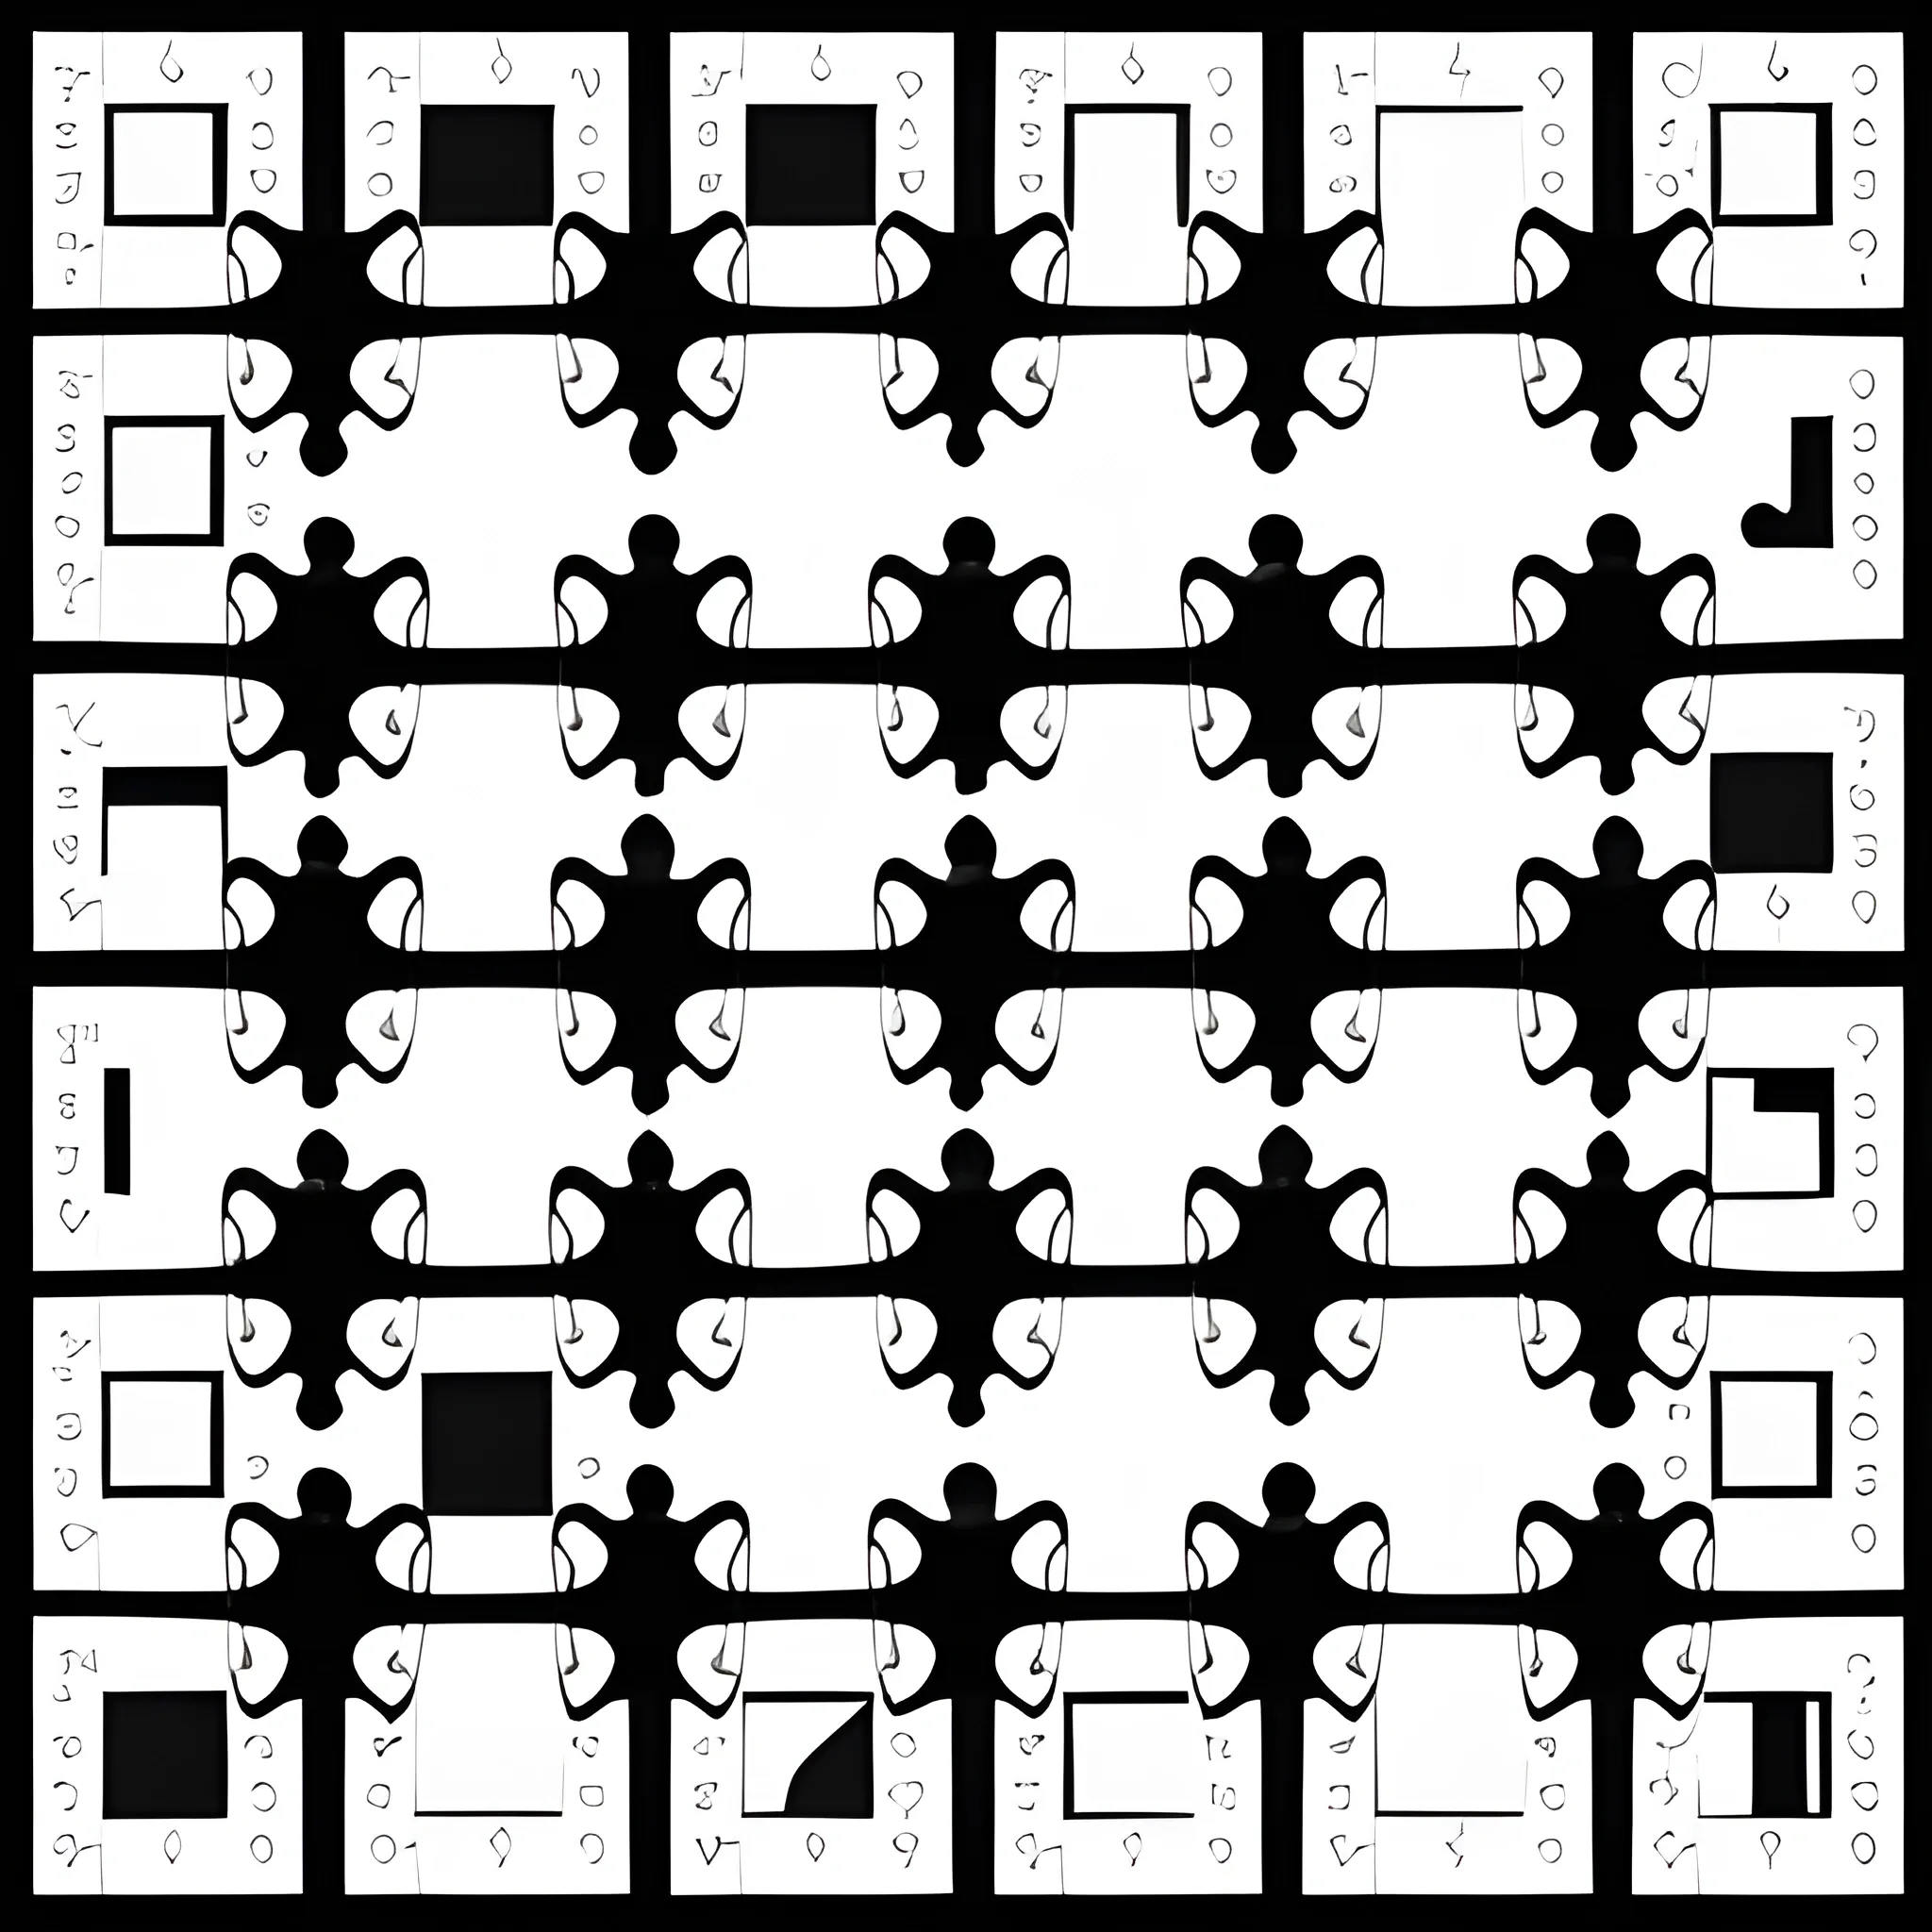 puzzle pattern with 20 differente pieces, white pieces, black border, pieces with straight edges, square resolution., Cartoon.